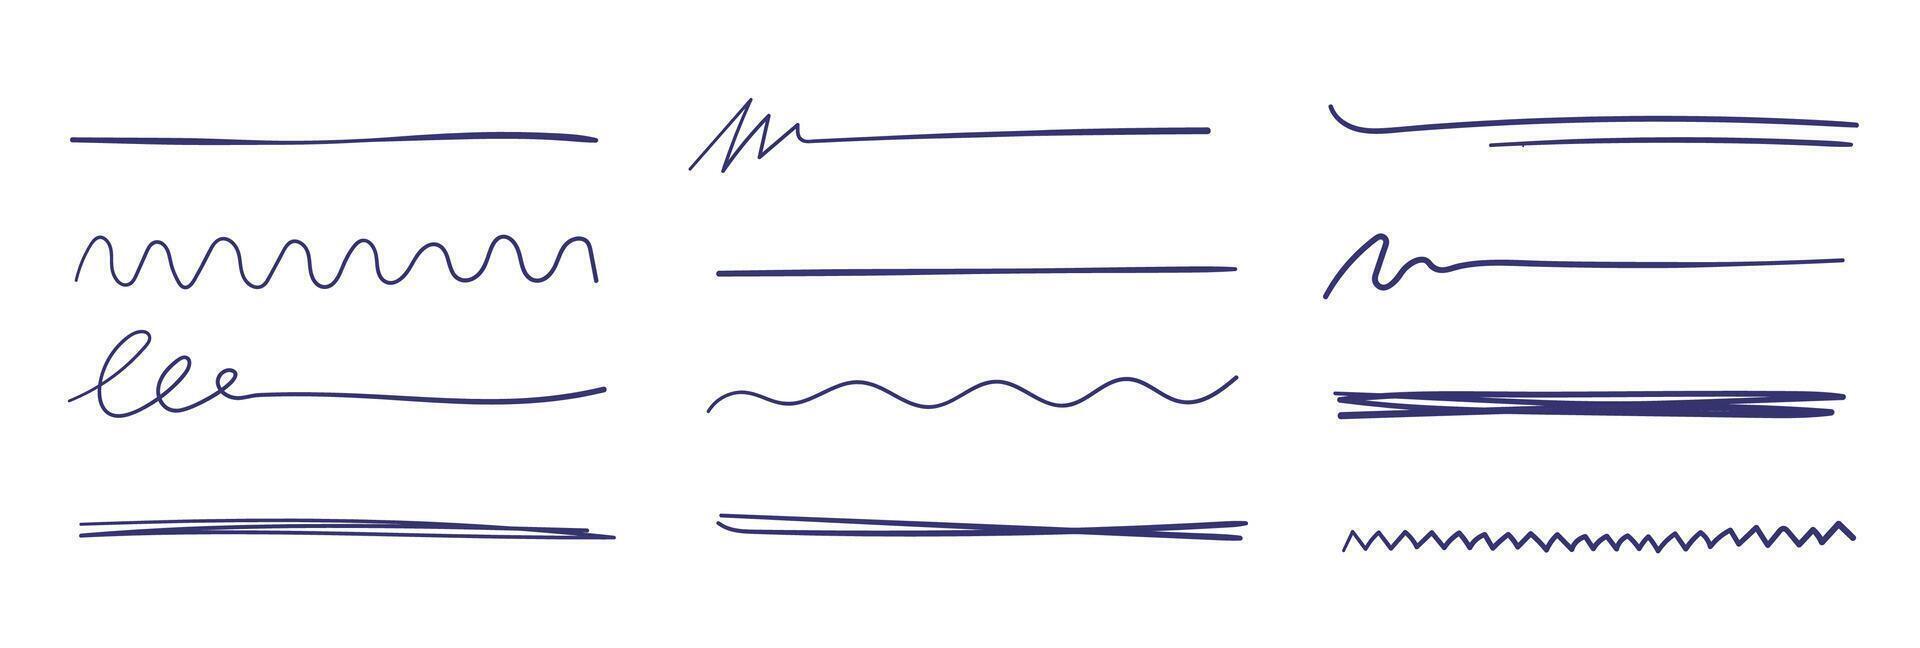 The pen emphasizes the stroke of the line, scribble with a marker. Hand drawing. Underlining text with a pen. vector